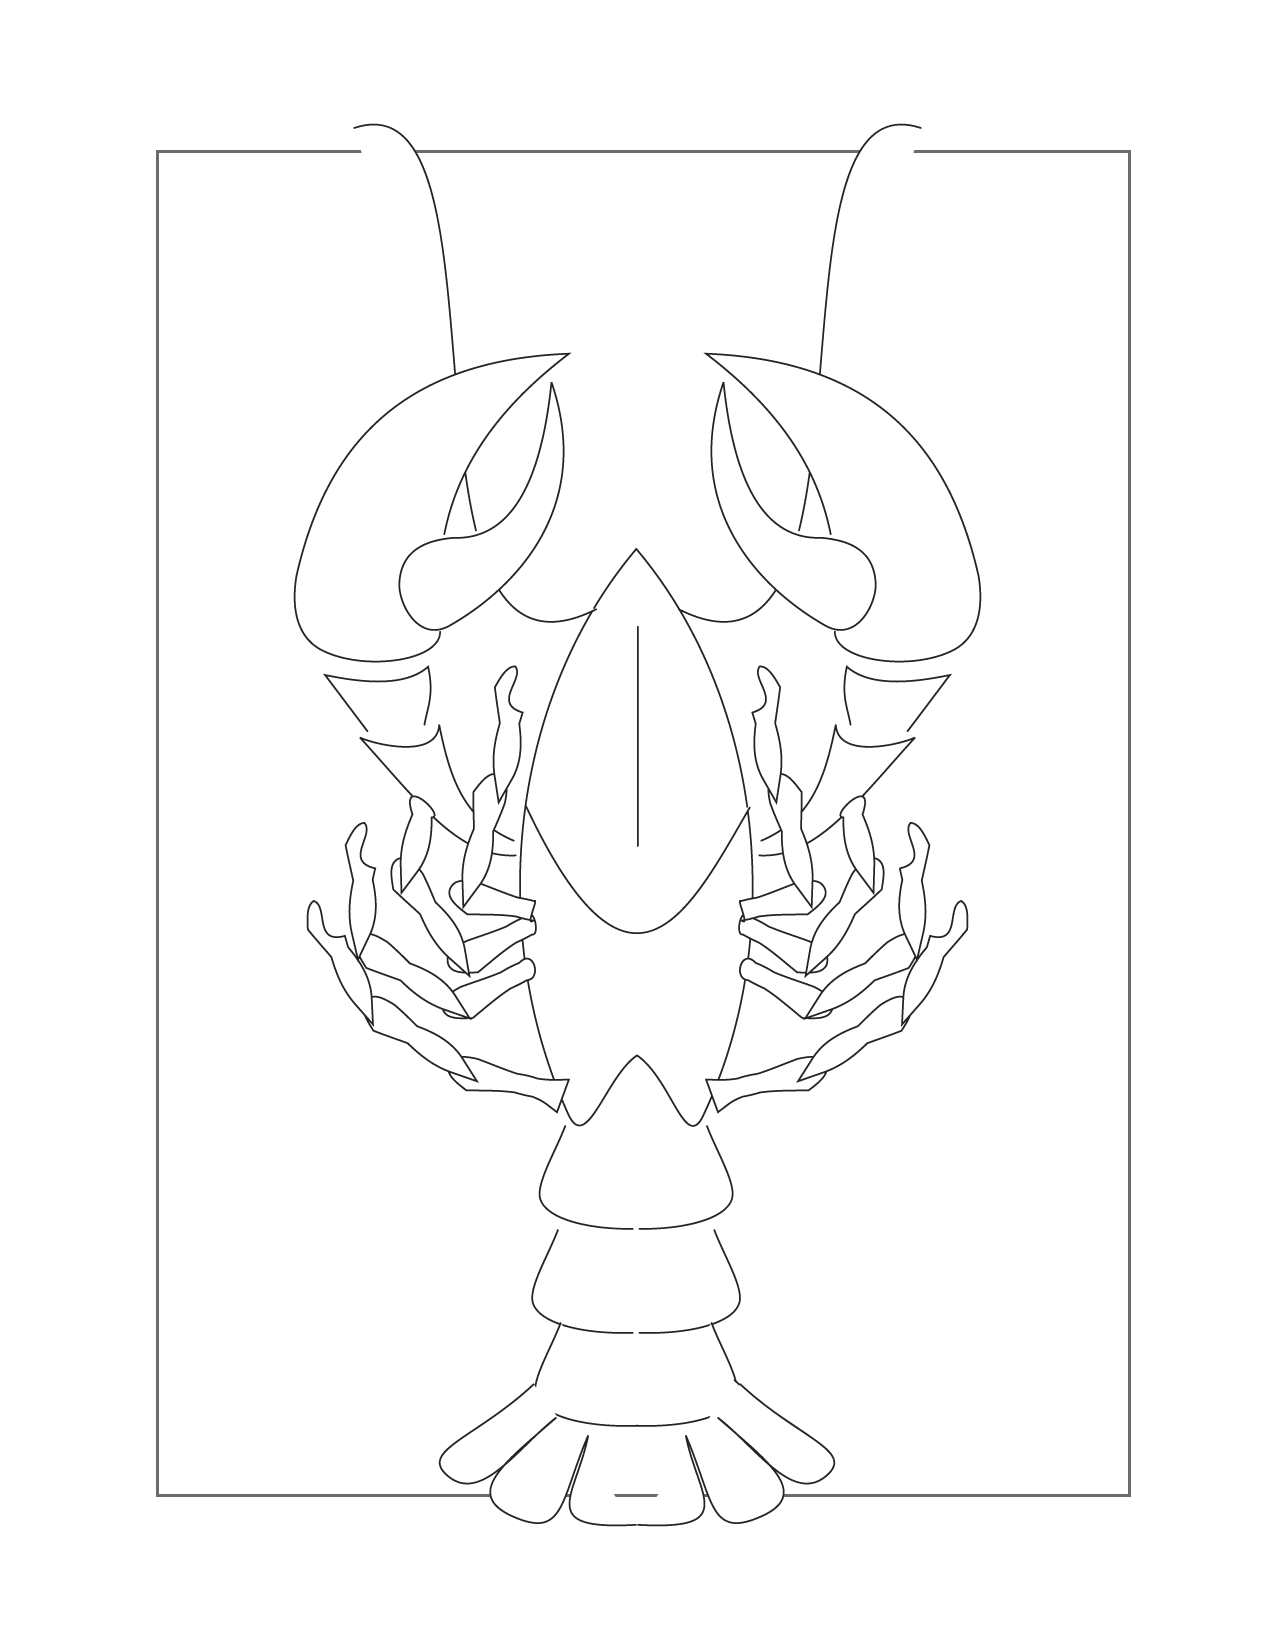 Lobster Lineart From Above Coloring Page